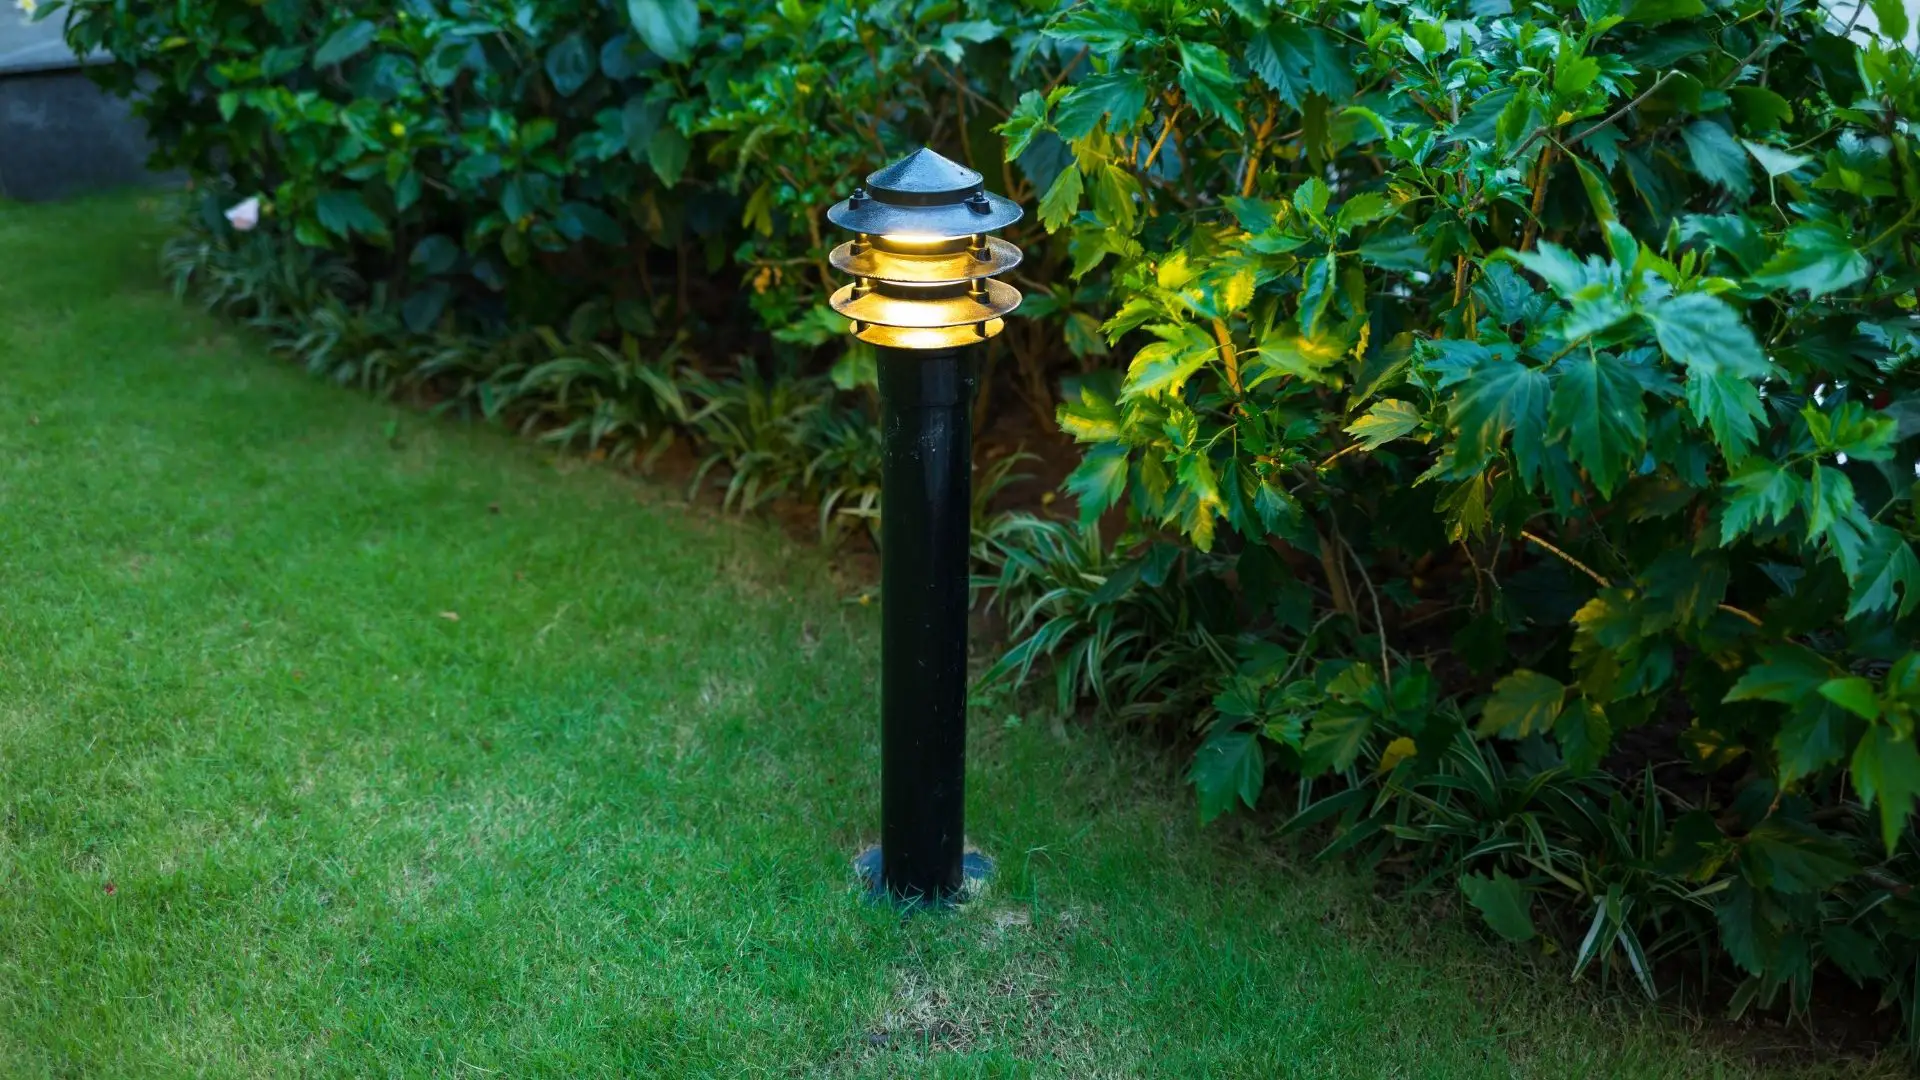 Which bulbs should you have for your outdoor lighting?